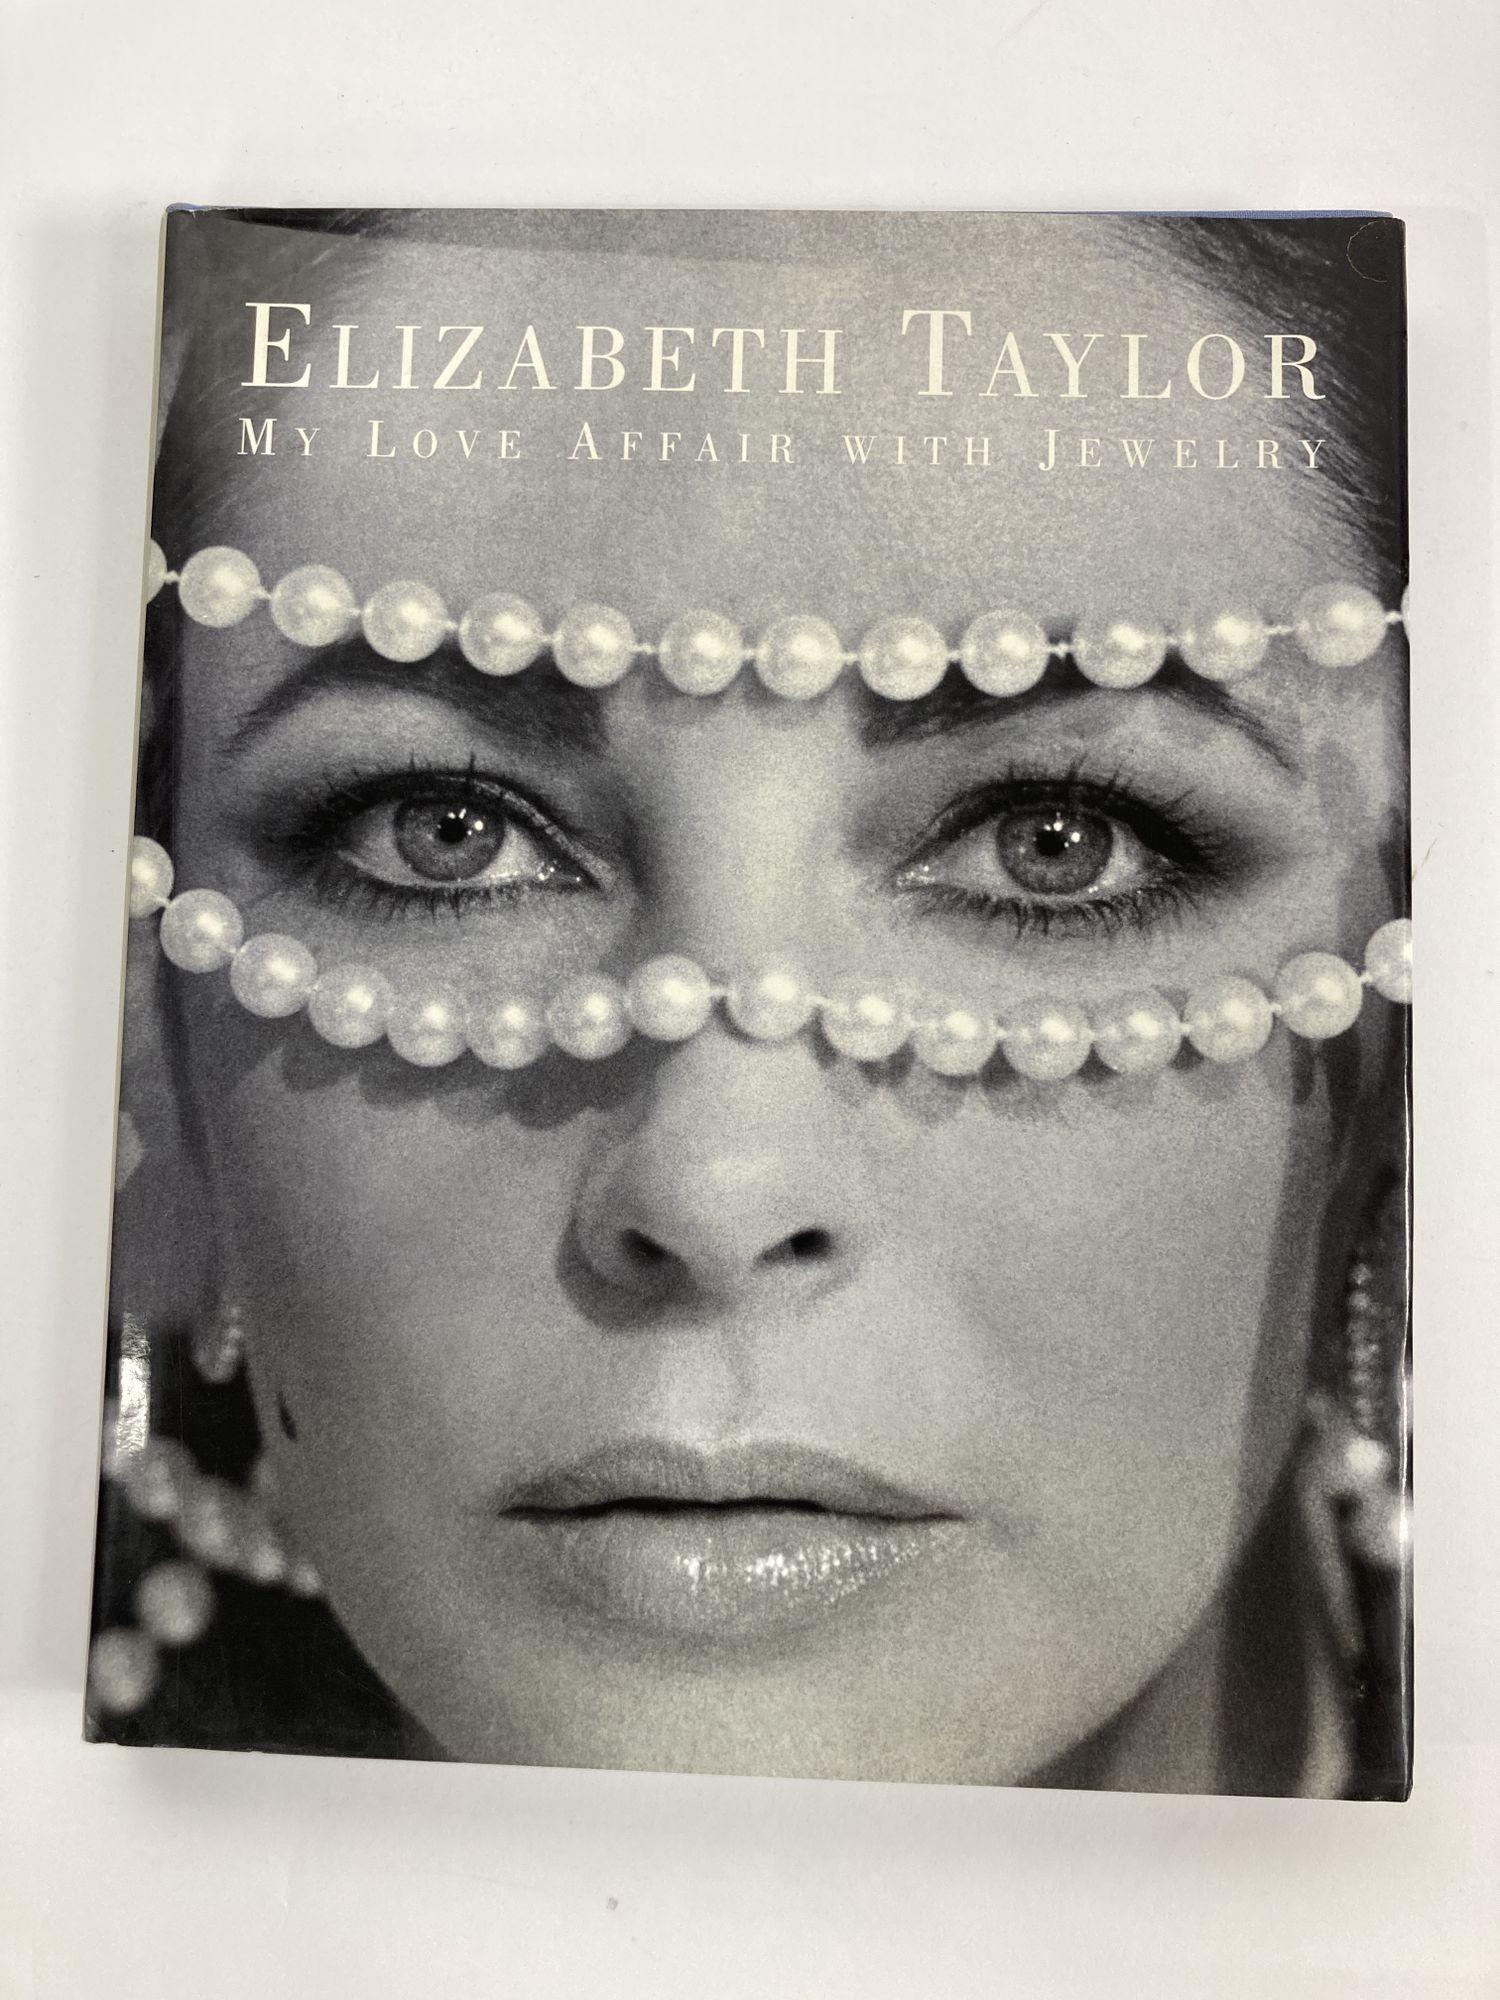 Elizabeth Taylor:my love affair with jewelry 1st edition hardcover book.
Edited by Ruth A. Peltason. 280 illustrations, including 175 color photographs by John Bigelow Taylor.
Dimensions: 10